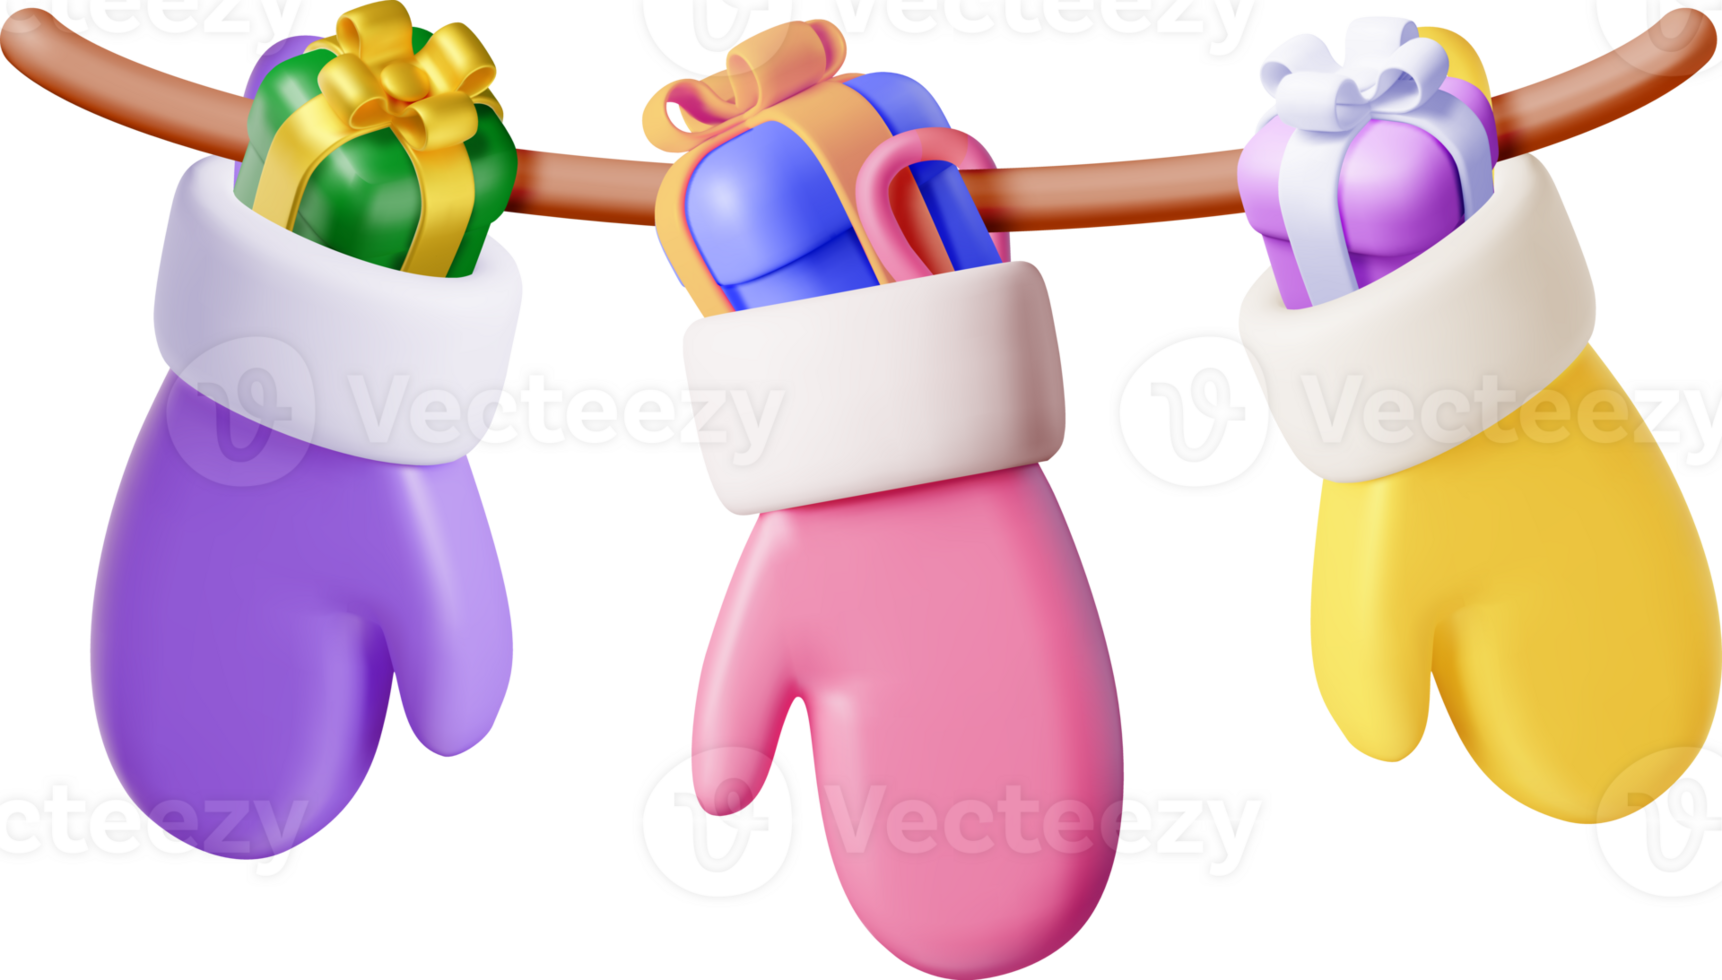 3D Gloves full of Gifts Hanging on Clothesline png